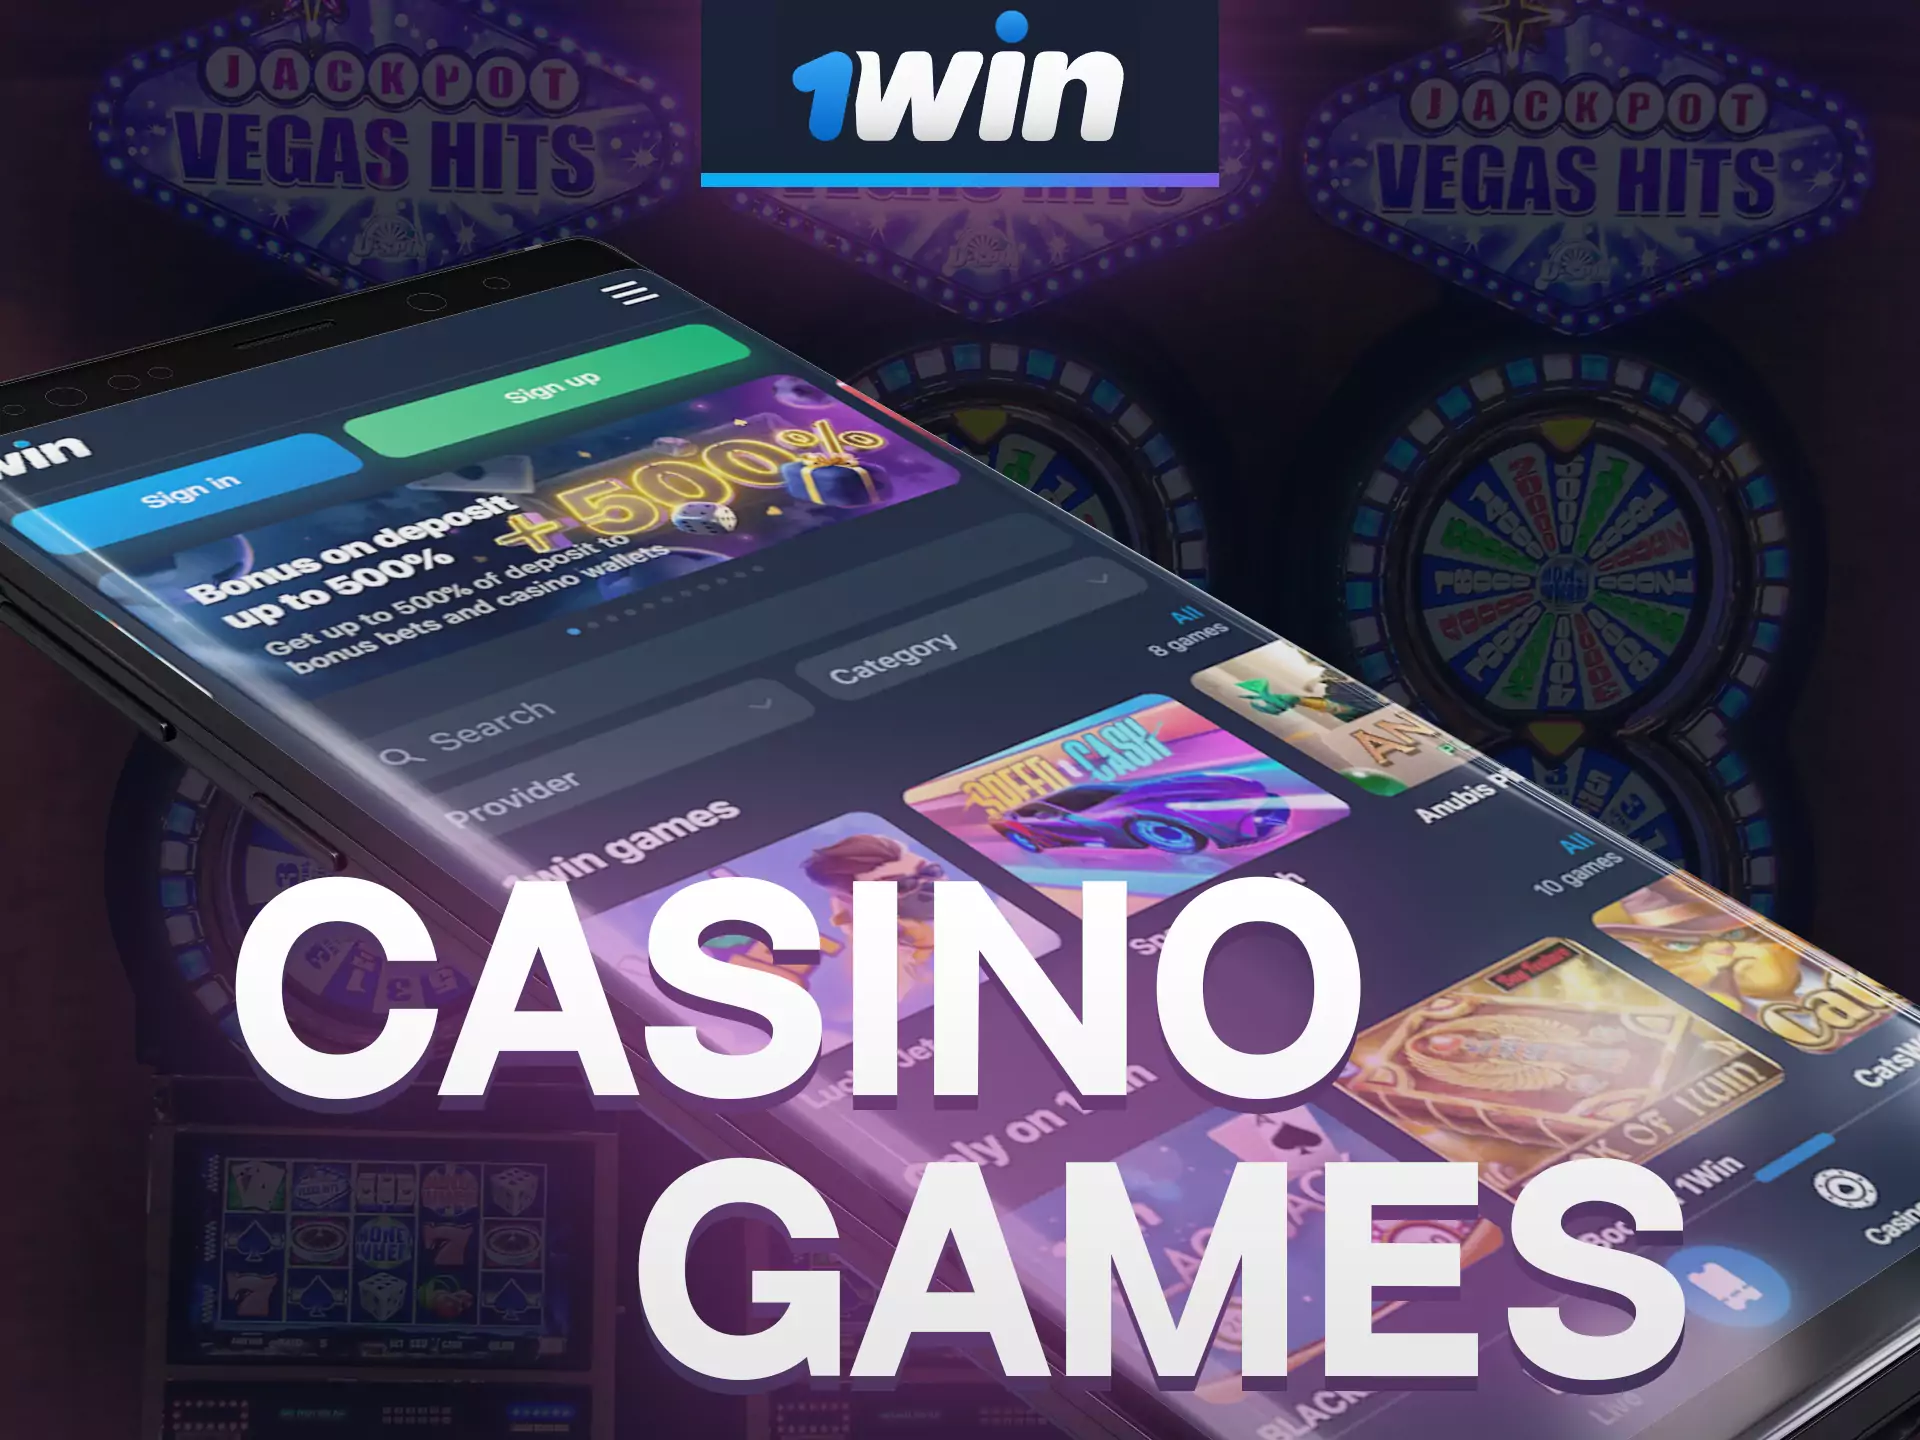 Search for your favourite casino games in 1win app.